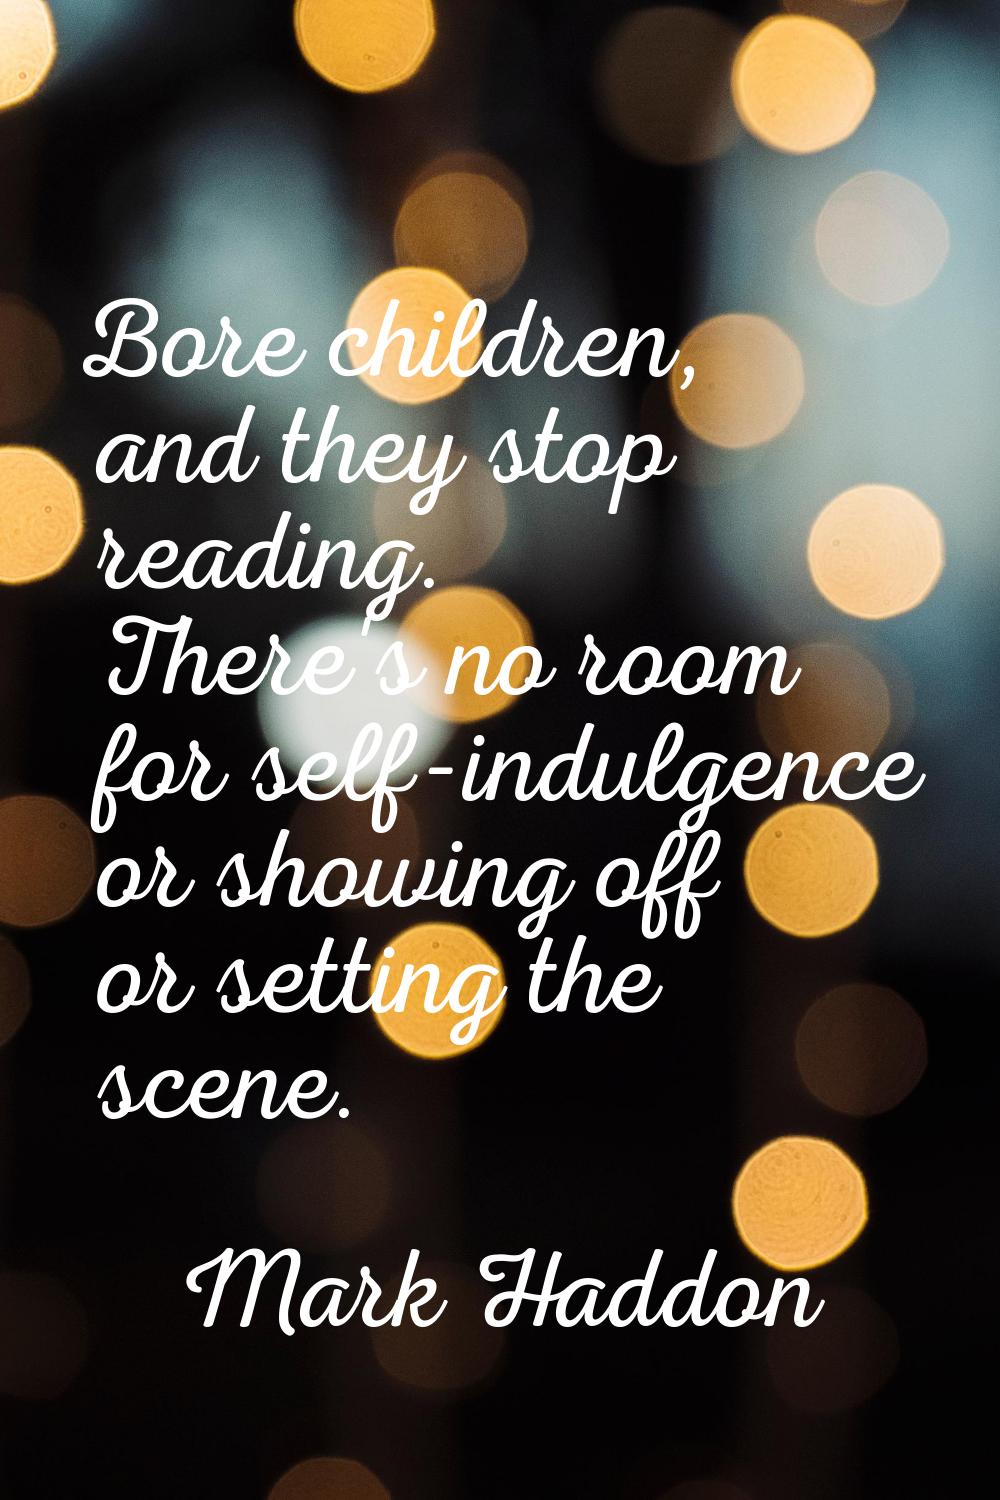 Bore children, and they stop reading. There's no room for self-indulgence or showing off or setting